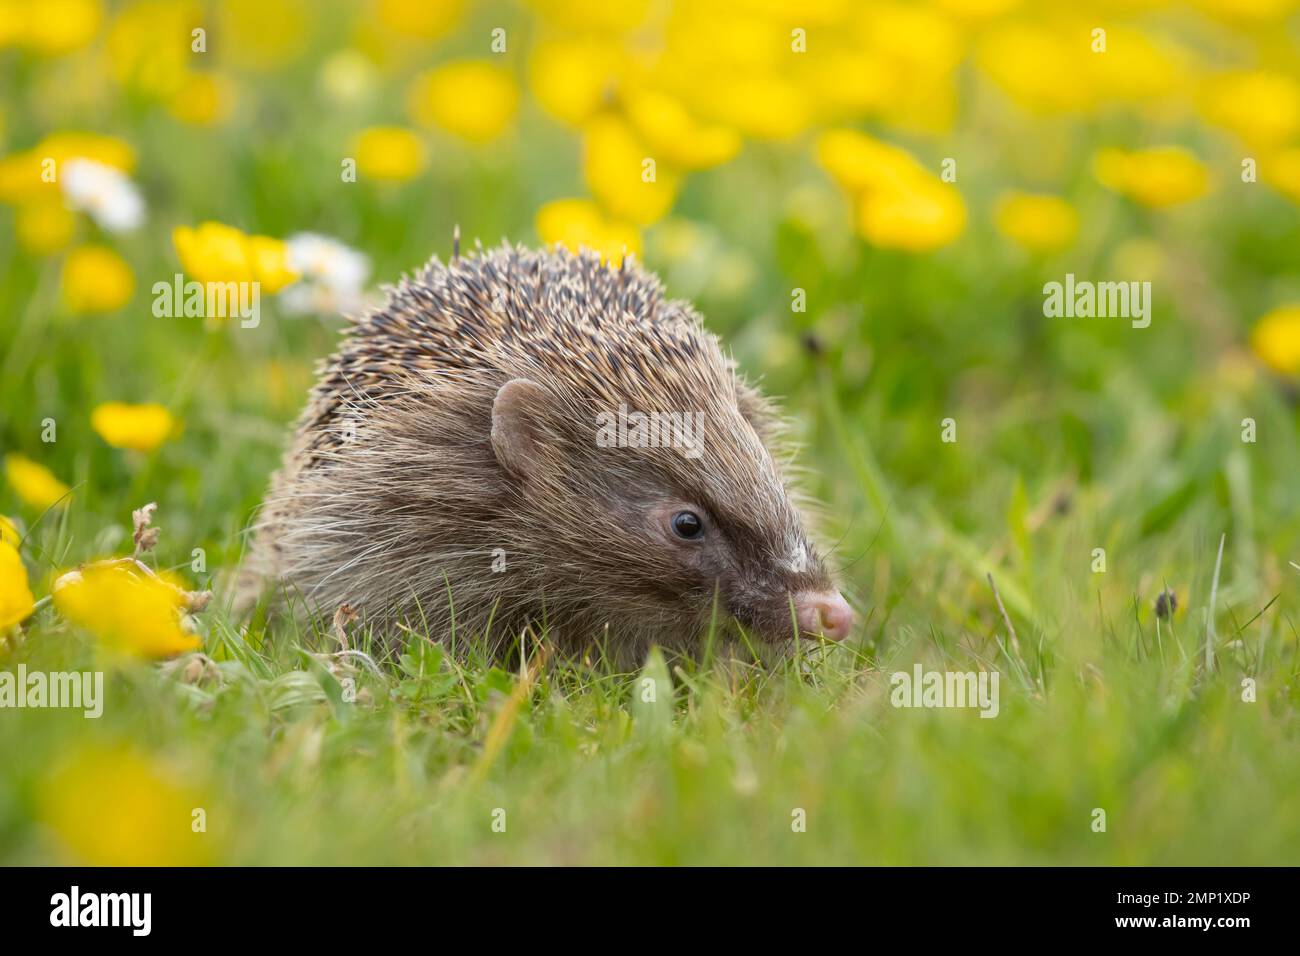 European hedgehog Erinaceus europaeus adult in a spring time meadow with flowering Buttercups, Suffolk, England, United Kingdom Stock Photo